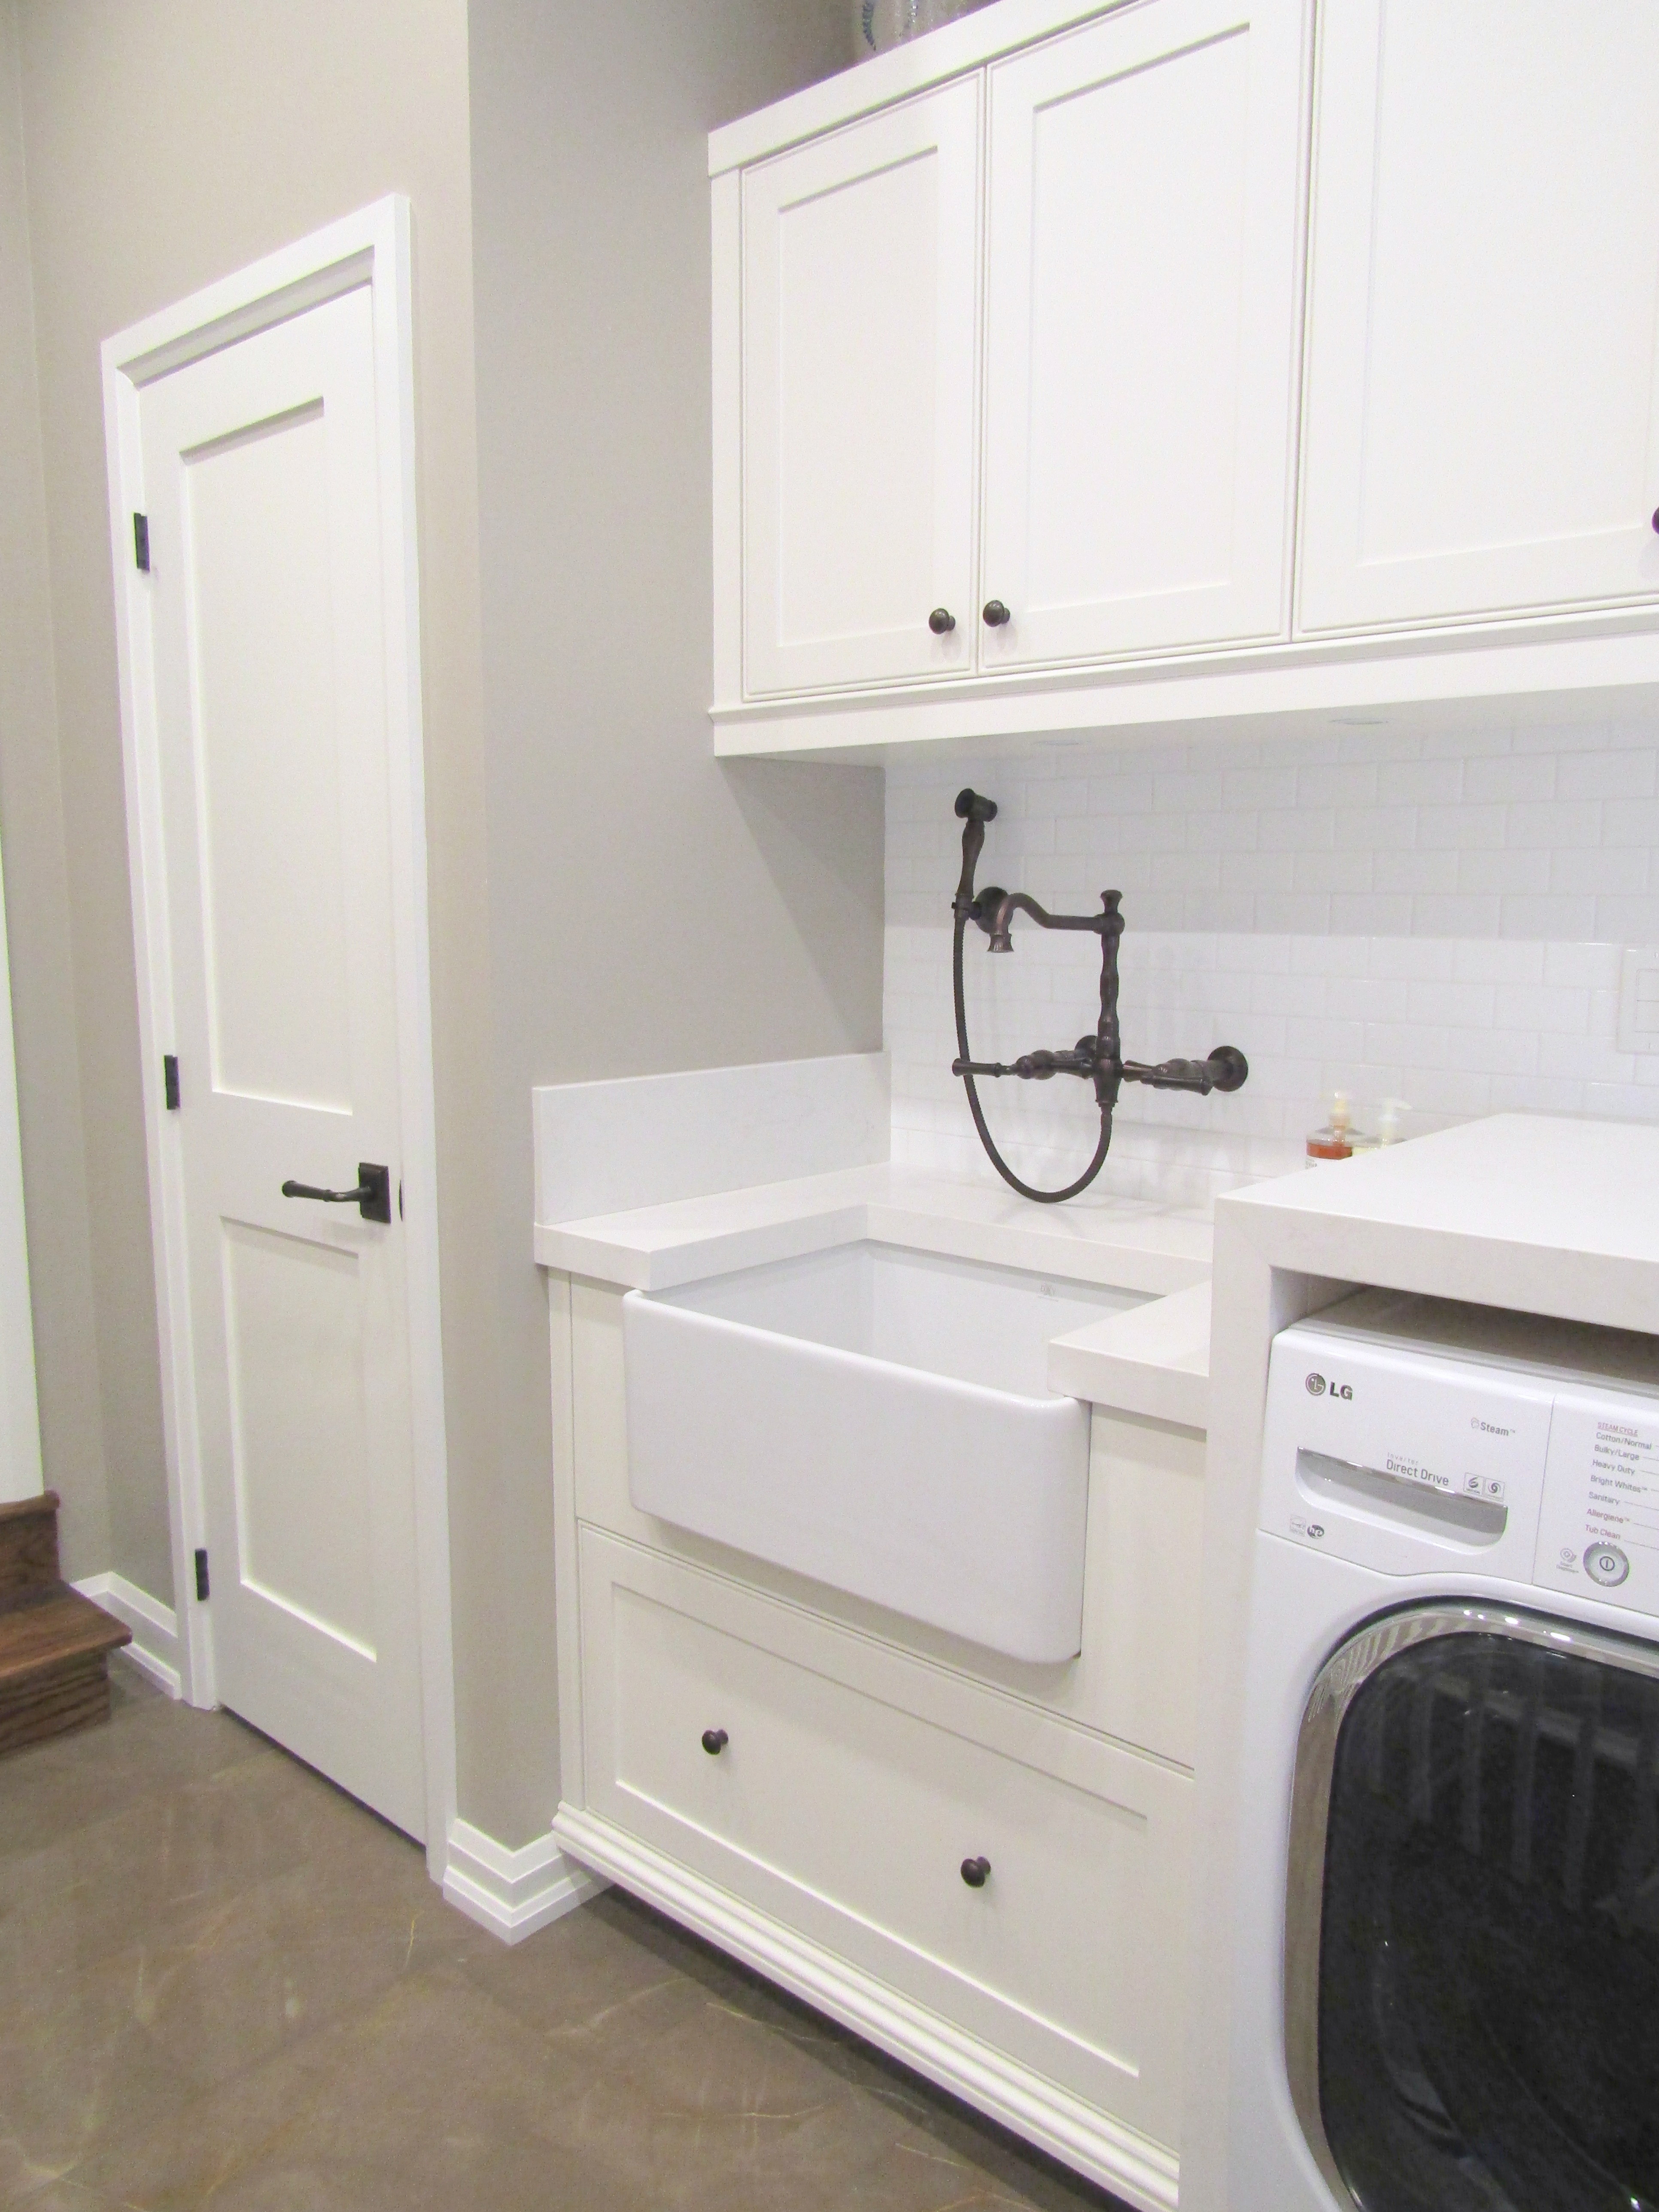 Laundry room with washer and deep white sink